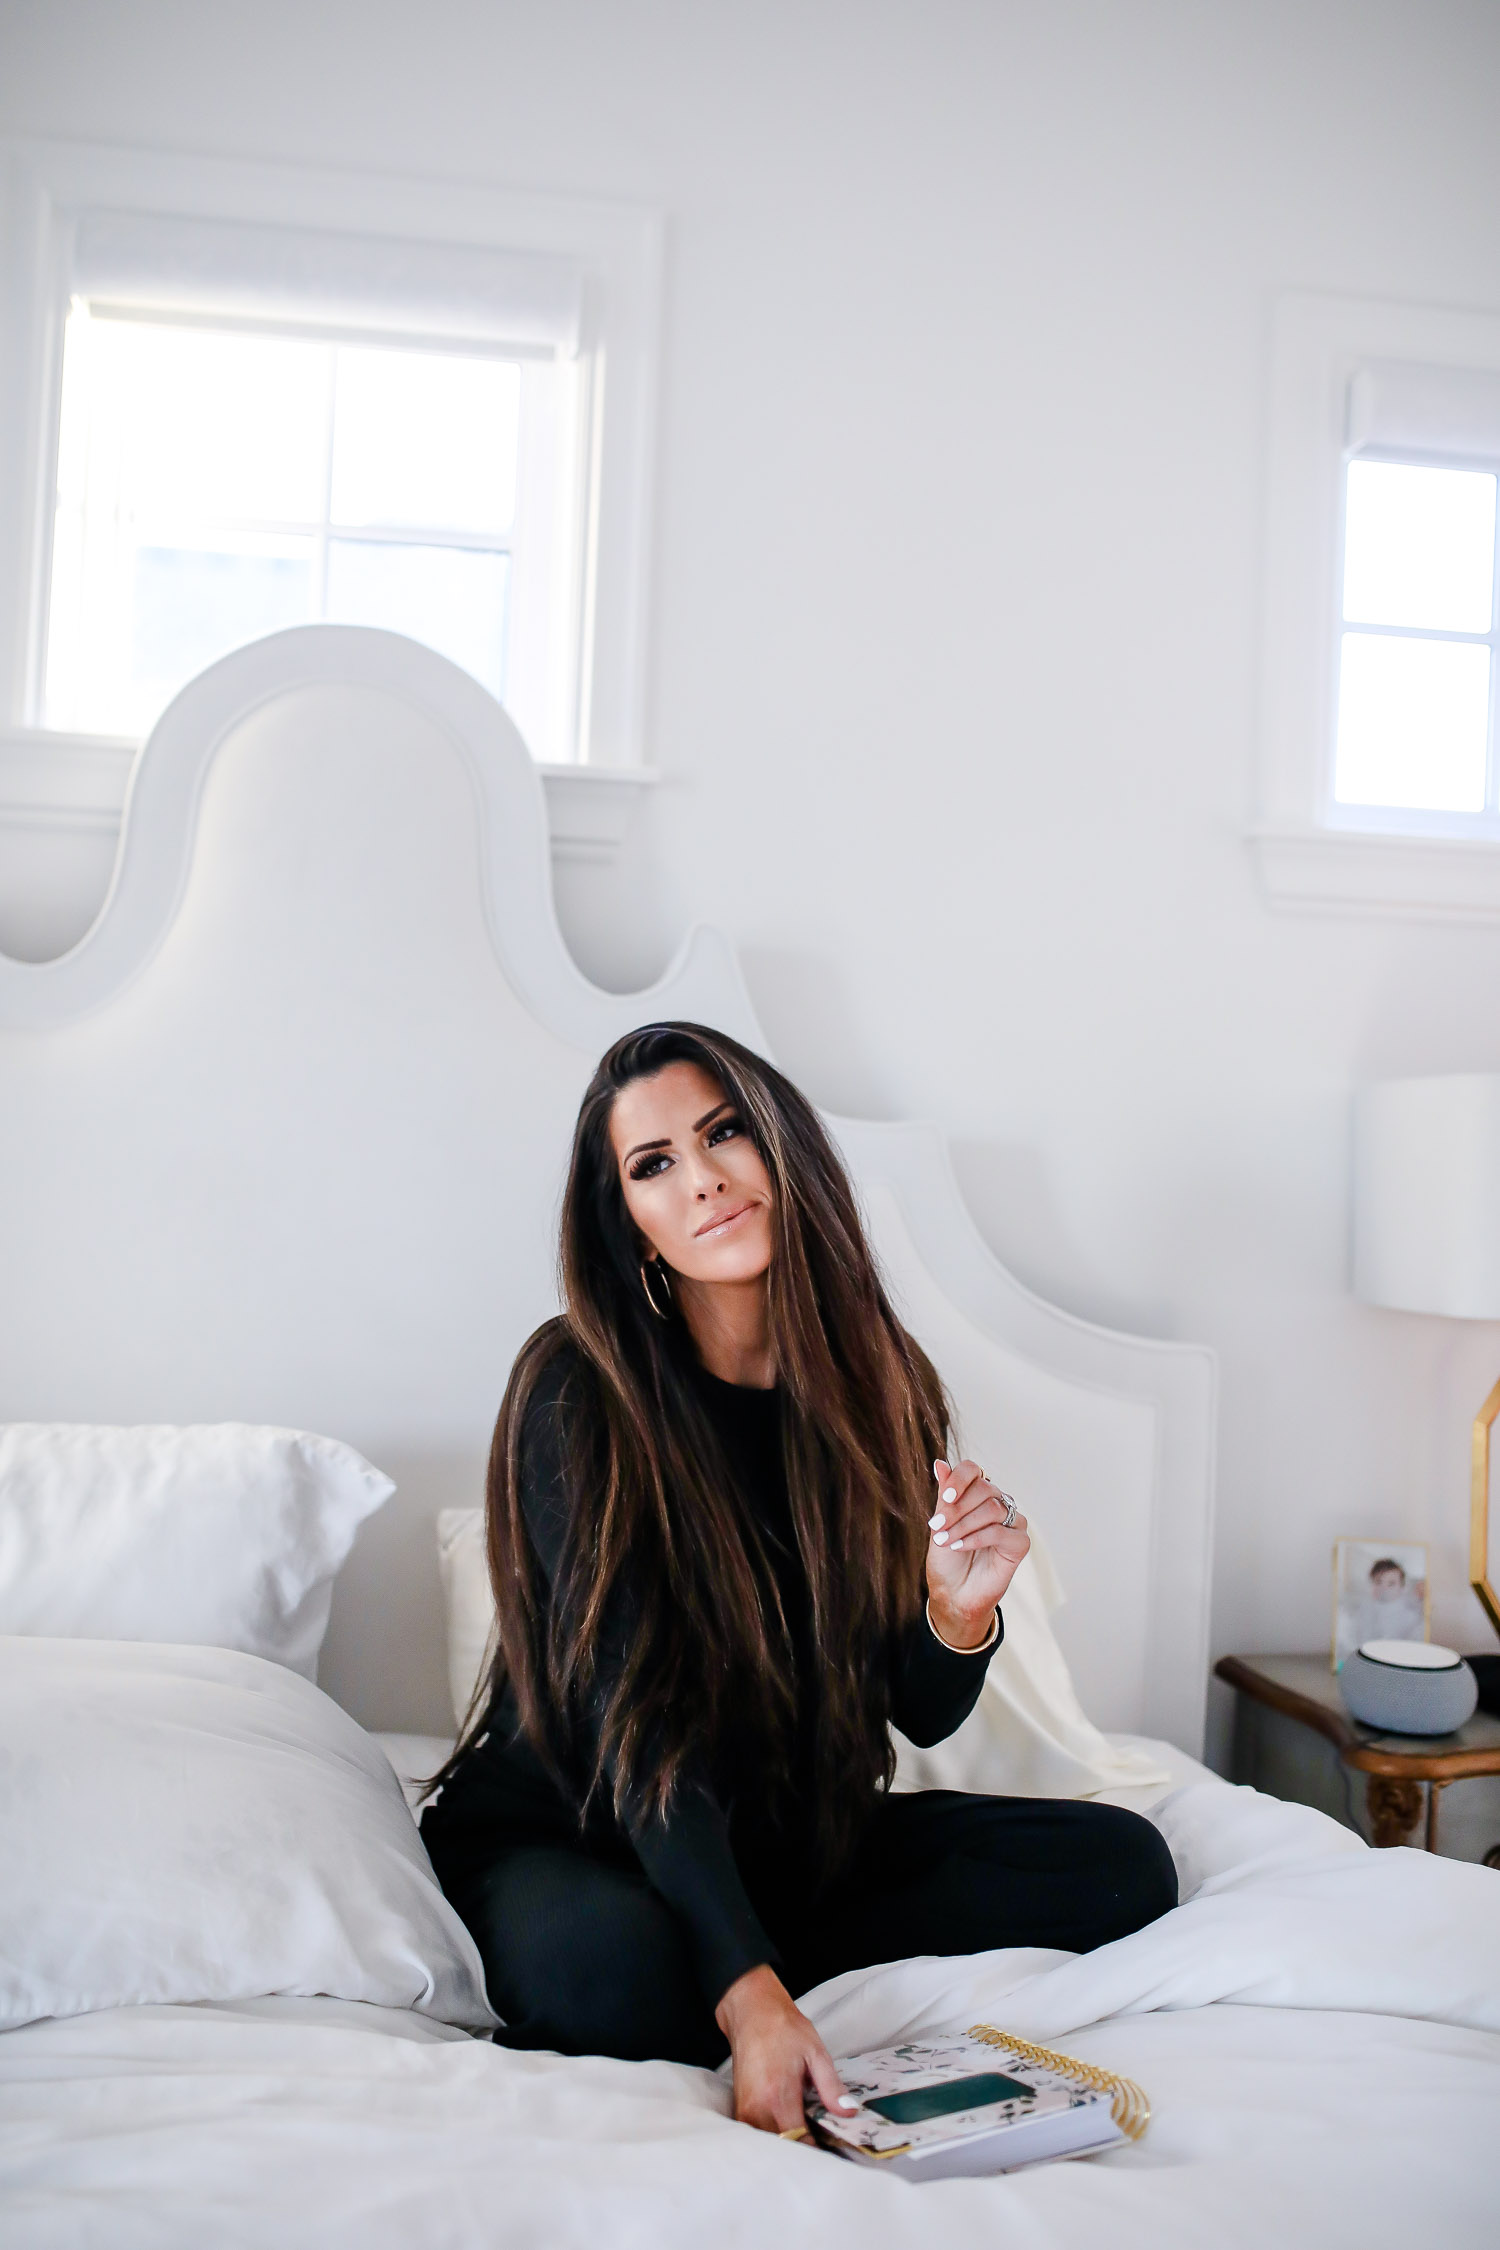 çverishop, verishop review, pinterest master bedroom inspo, emily gemma, hooker furniture nightstands-2 | Cozy Essentials by popular US fashion blog, The Sweetest Thing: image of a woman sitting on her bed and wearing a Verishop LETT Montreal Rib Top and Verishop LETT Heathrow Wide Leg Pant.